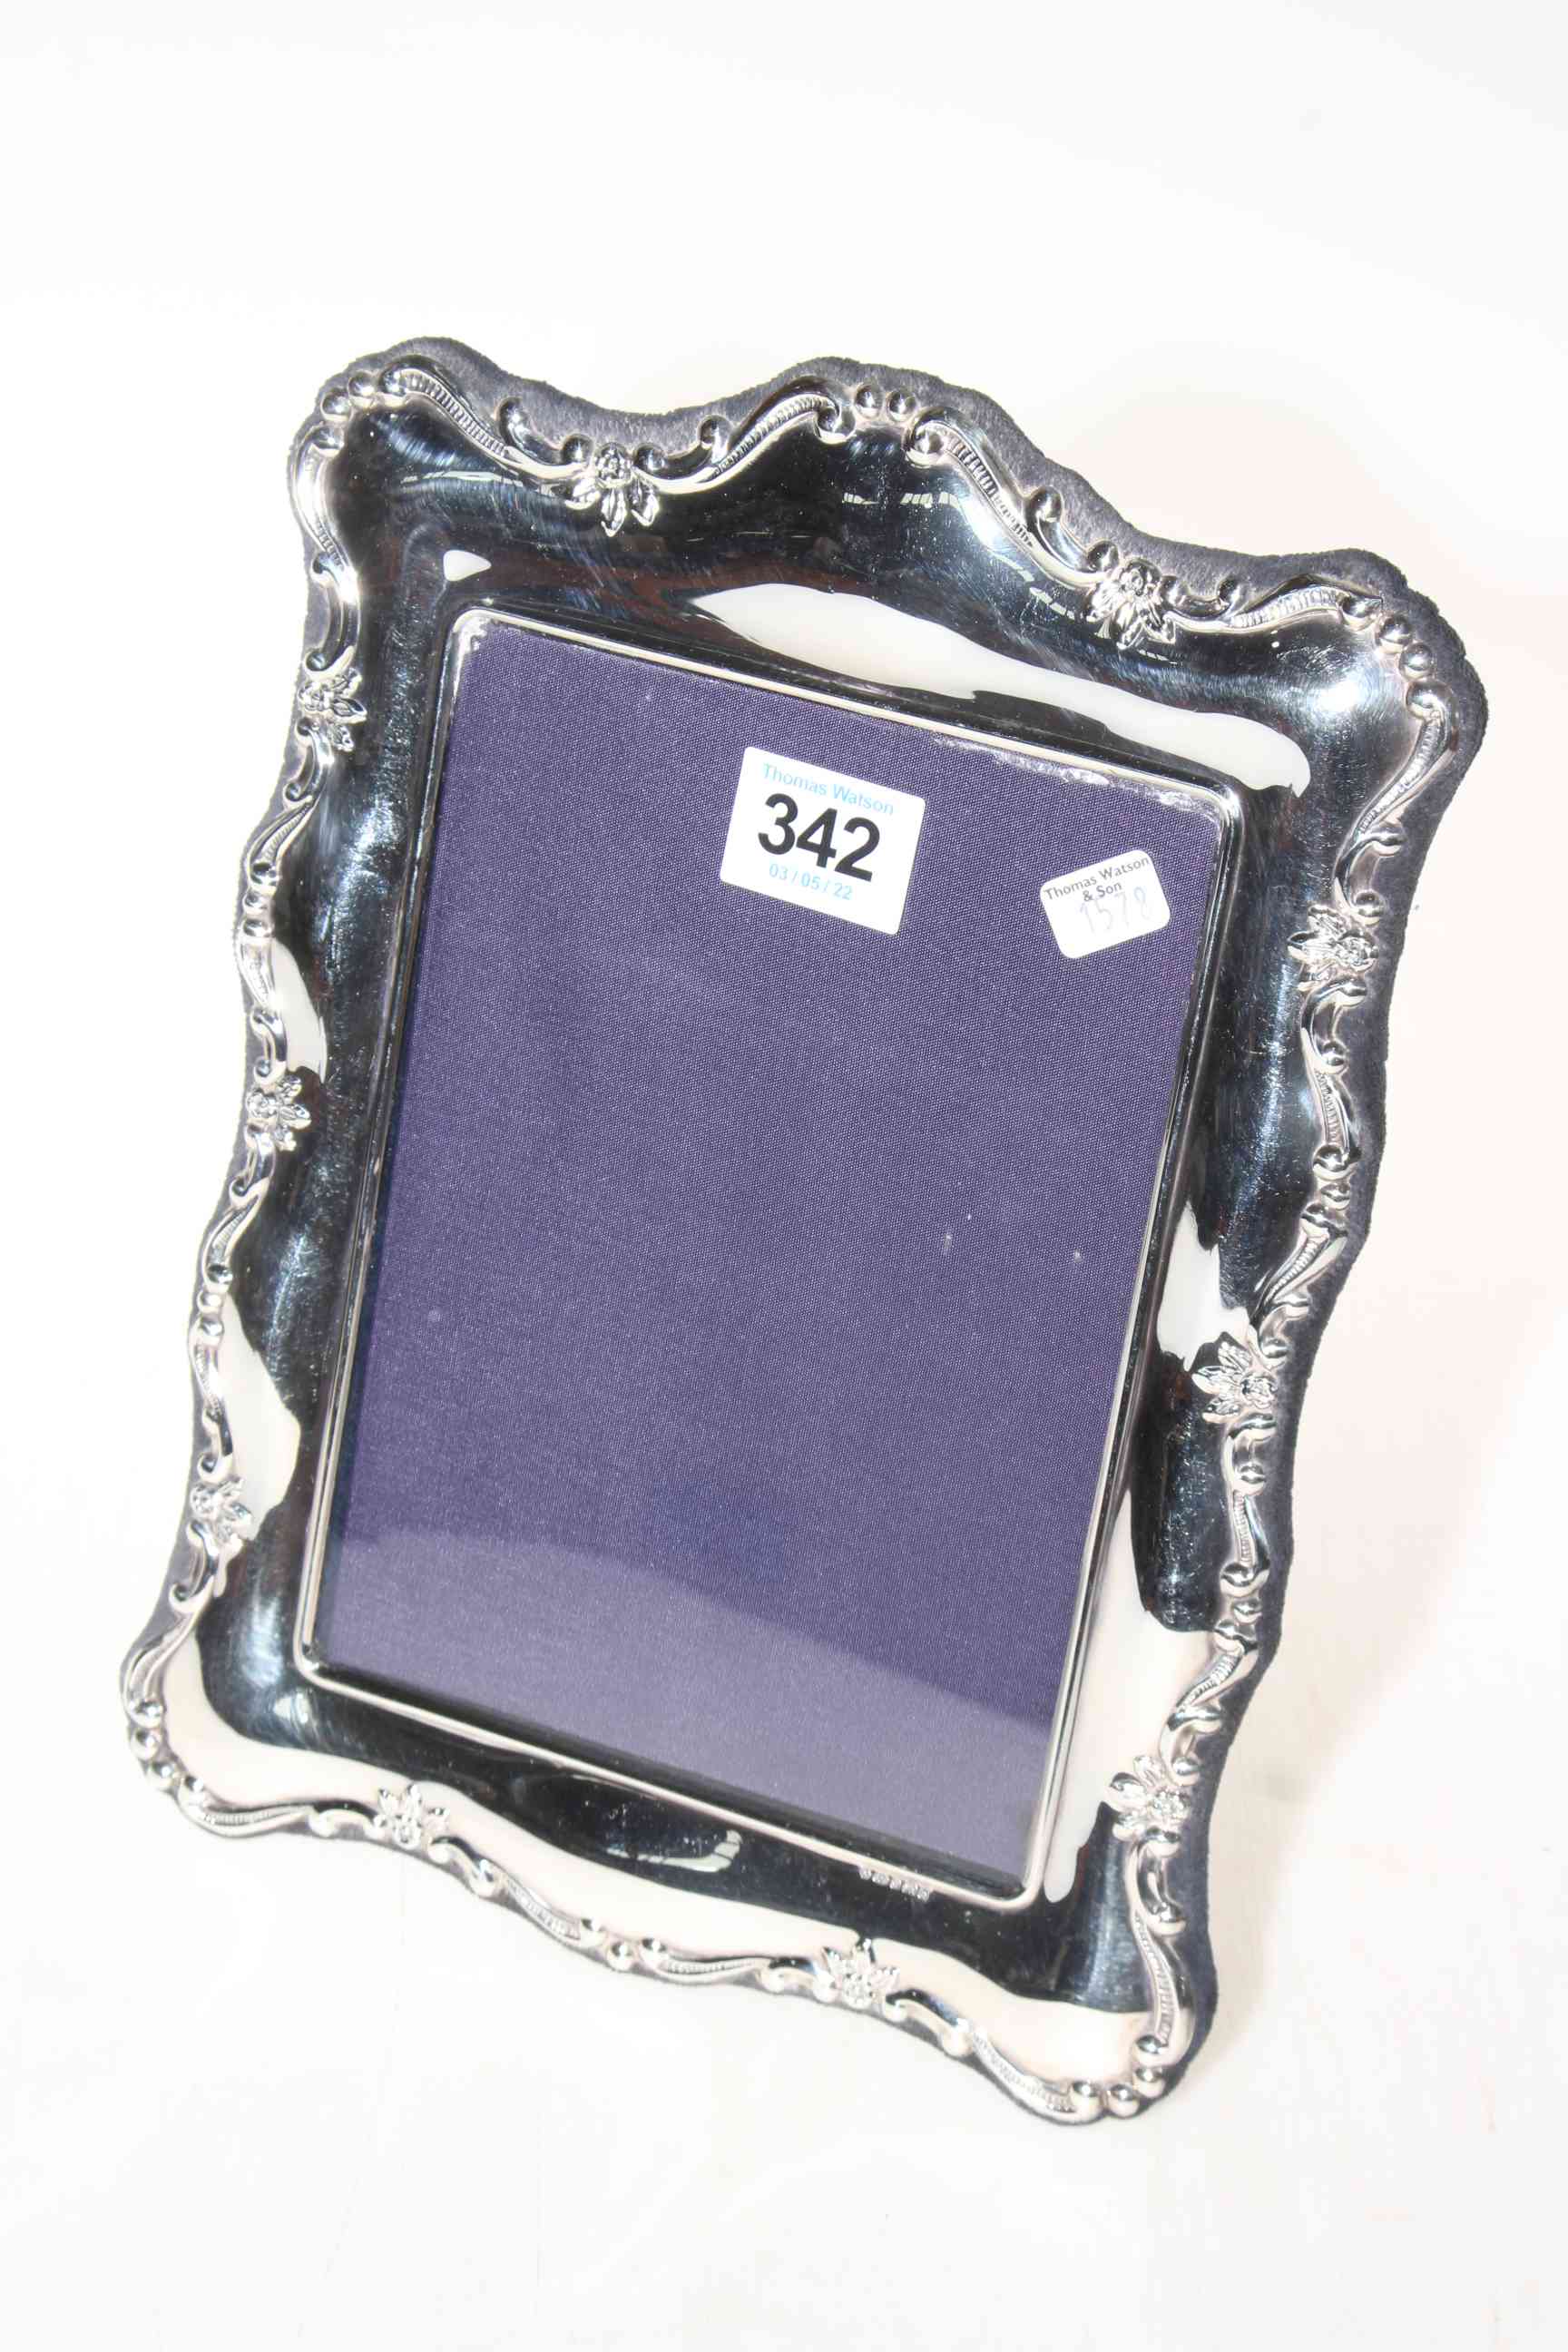 Single Sterling silver photograph frame, image size 7x5 inches.